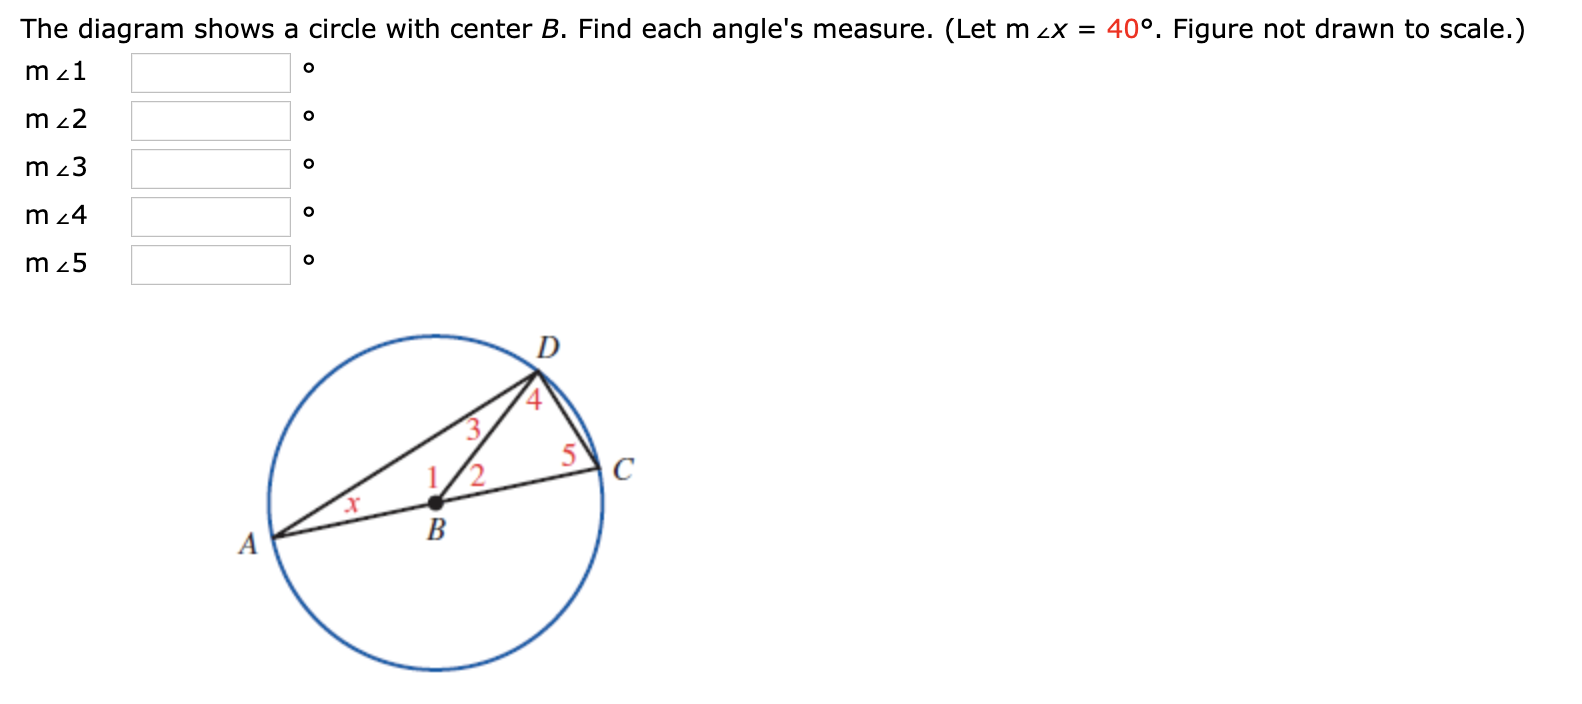 The diagram shows a circle with center B. Find each angle's measure. (Let m zx = 40°. Figure not drawn to scale.)
m z1
m z2
m 23
m 24
m 25
A
B
